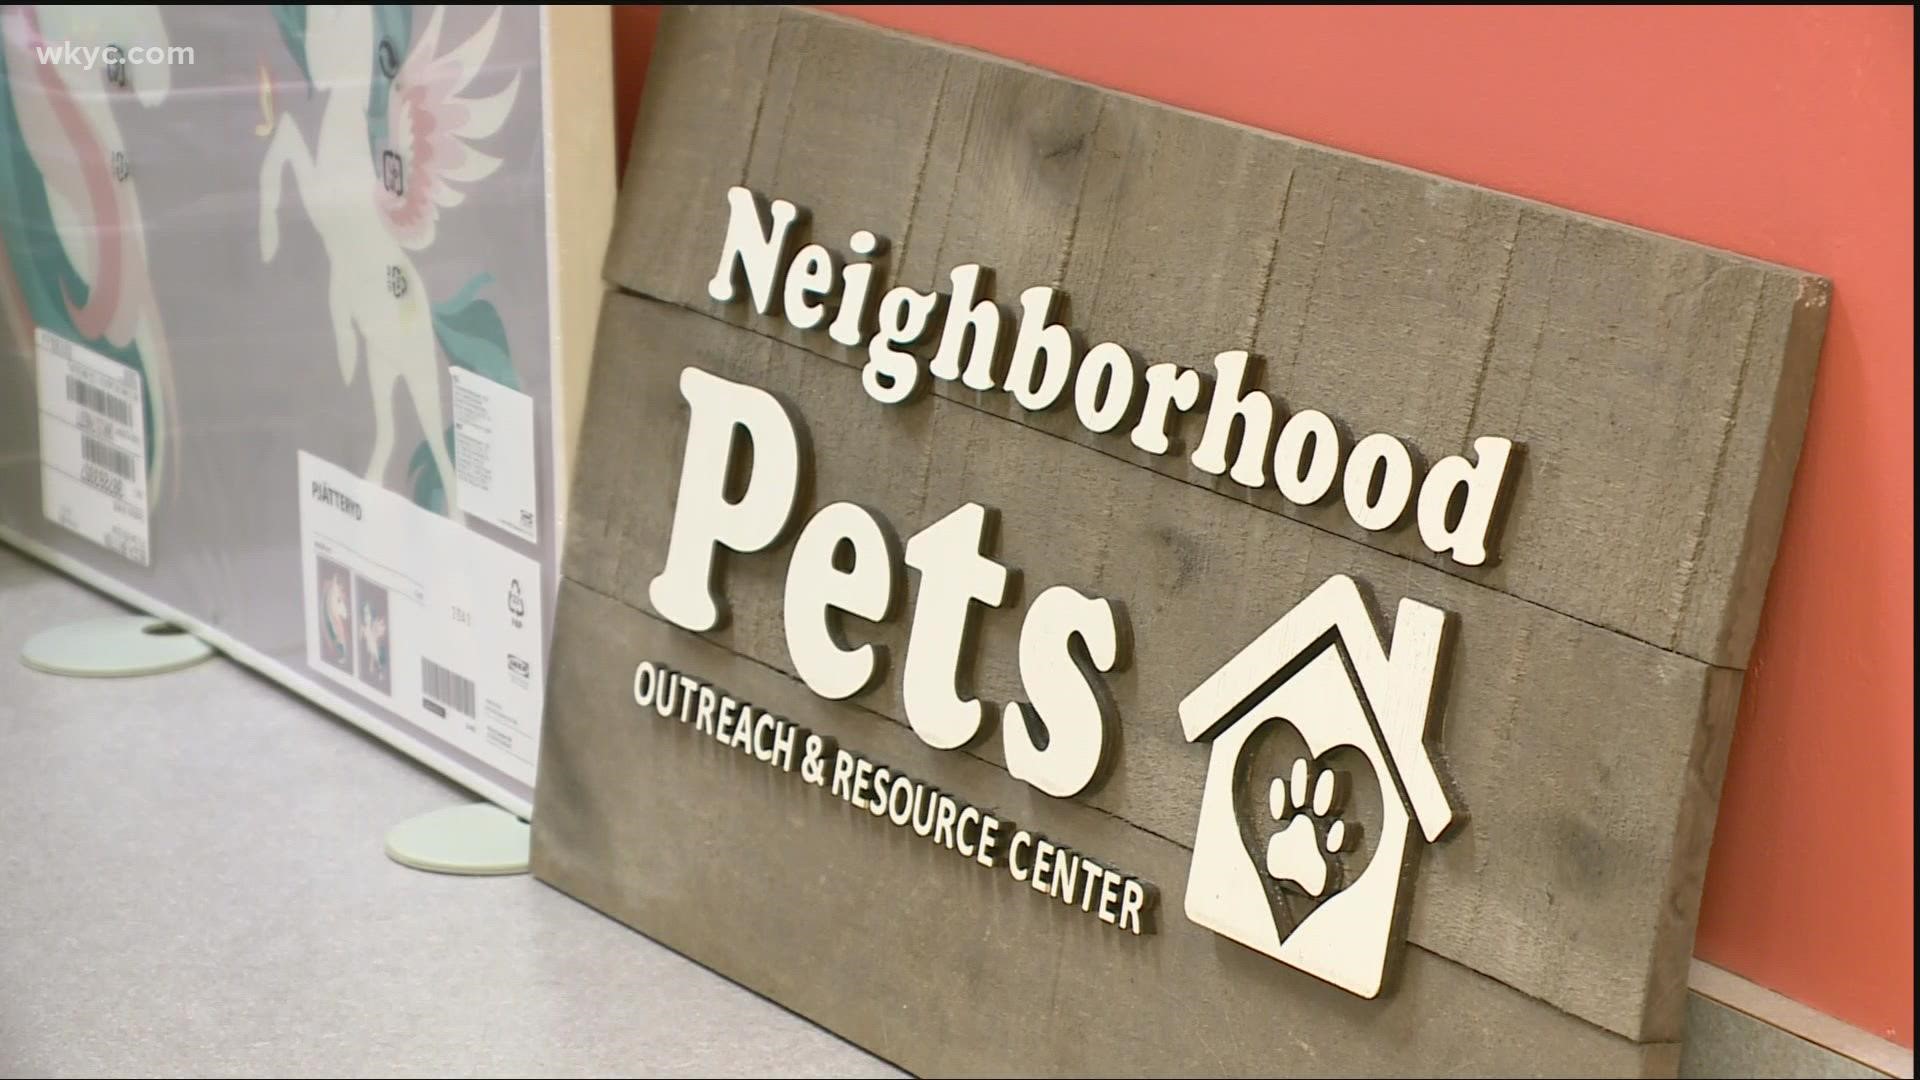 With the need being greater than ever, Neighborhood Pets had to expedite an expansion to meet the needs of clients.